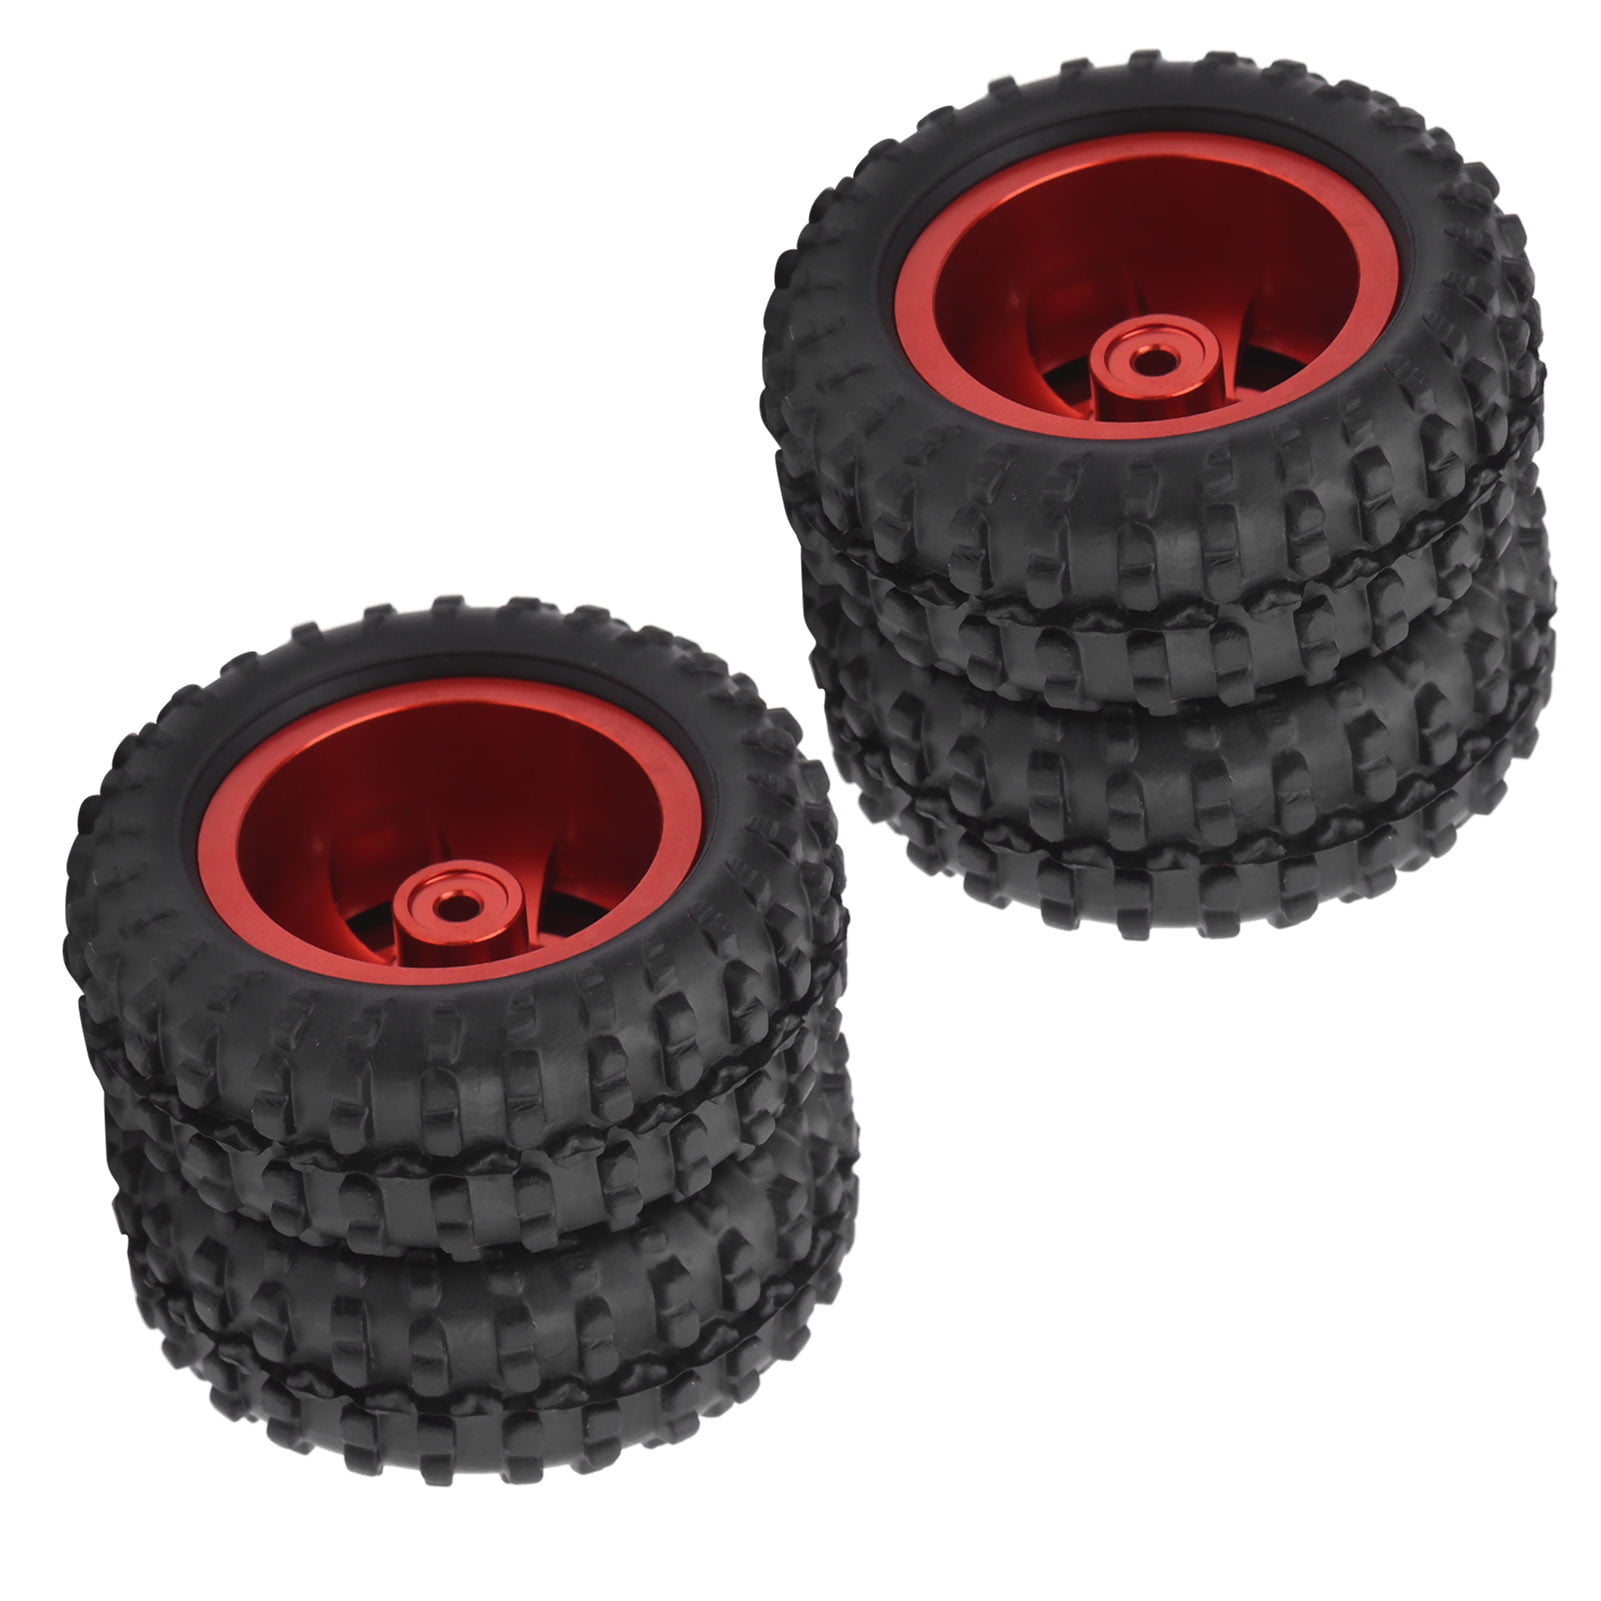 Details about   2Pcs 52mm Al Alloy Rear Tire Equipment For WPL D12 1/10 RC Truck Vehicle Red